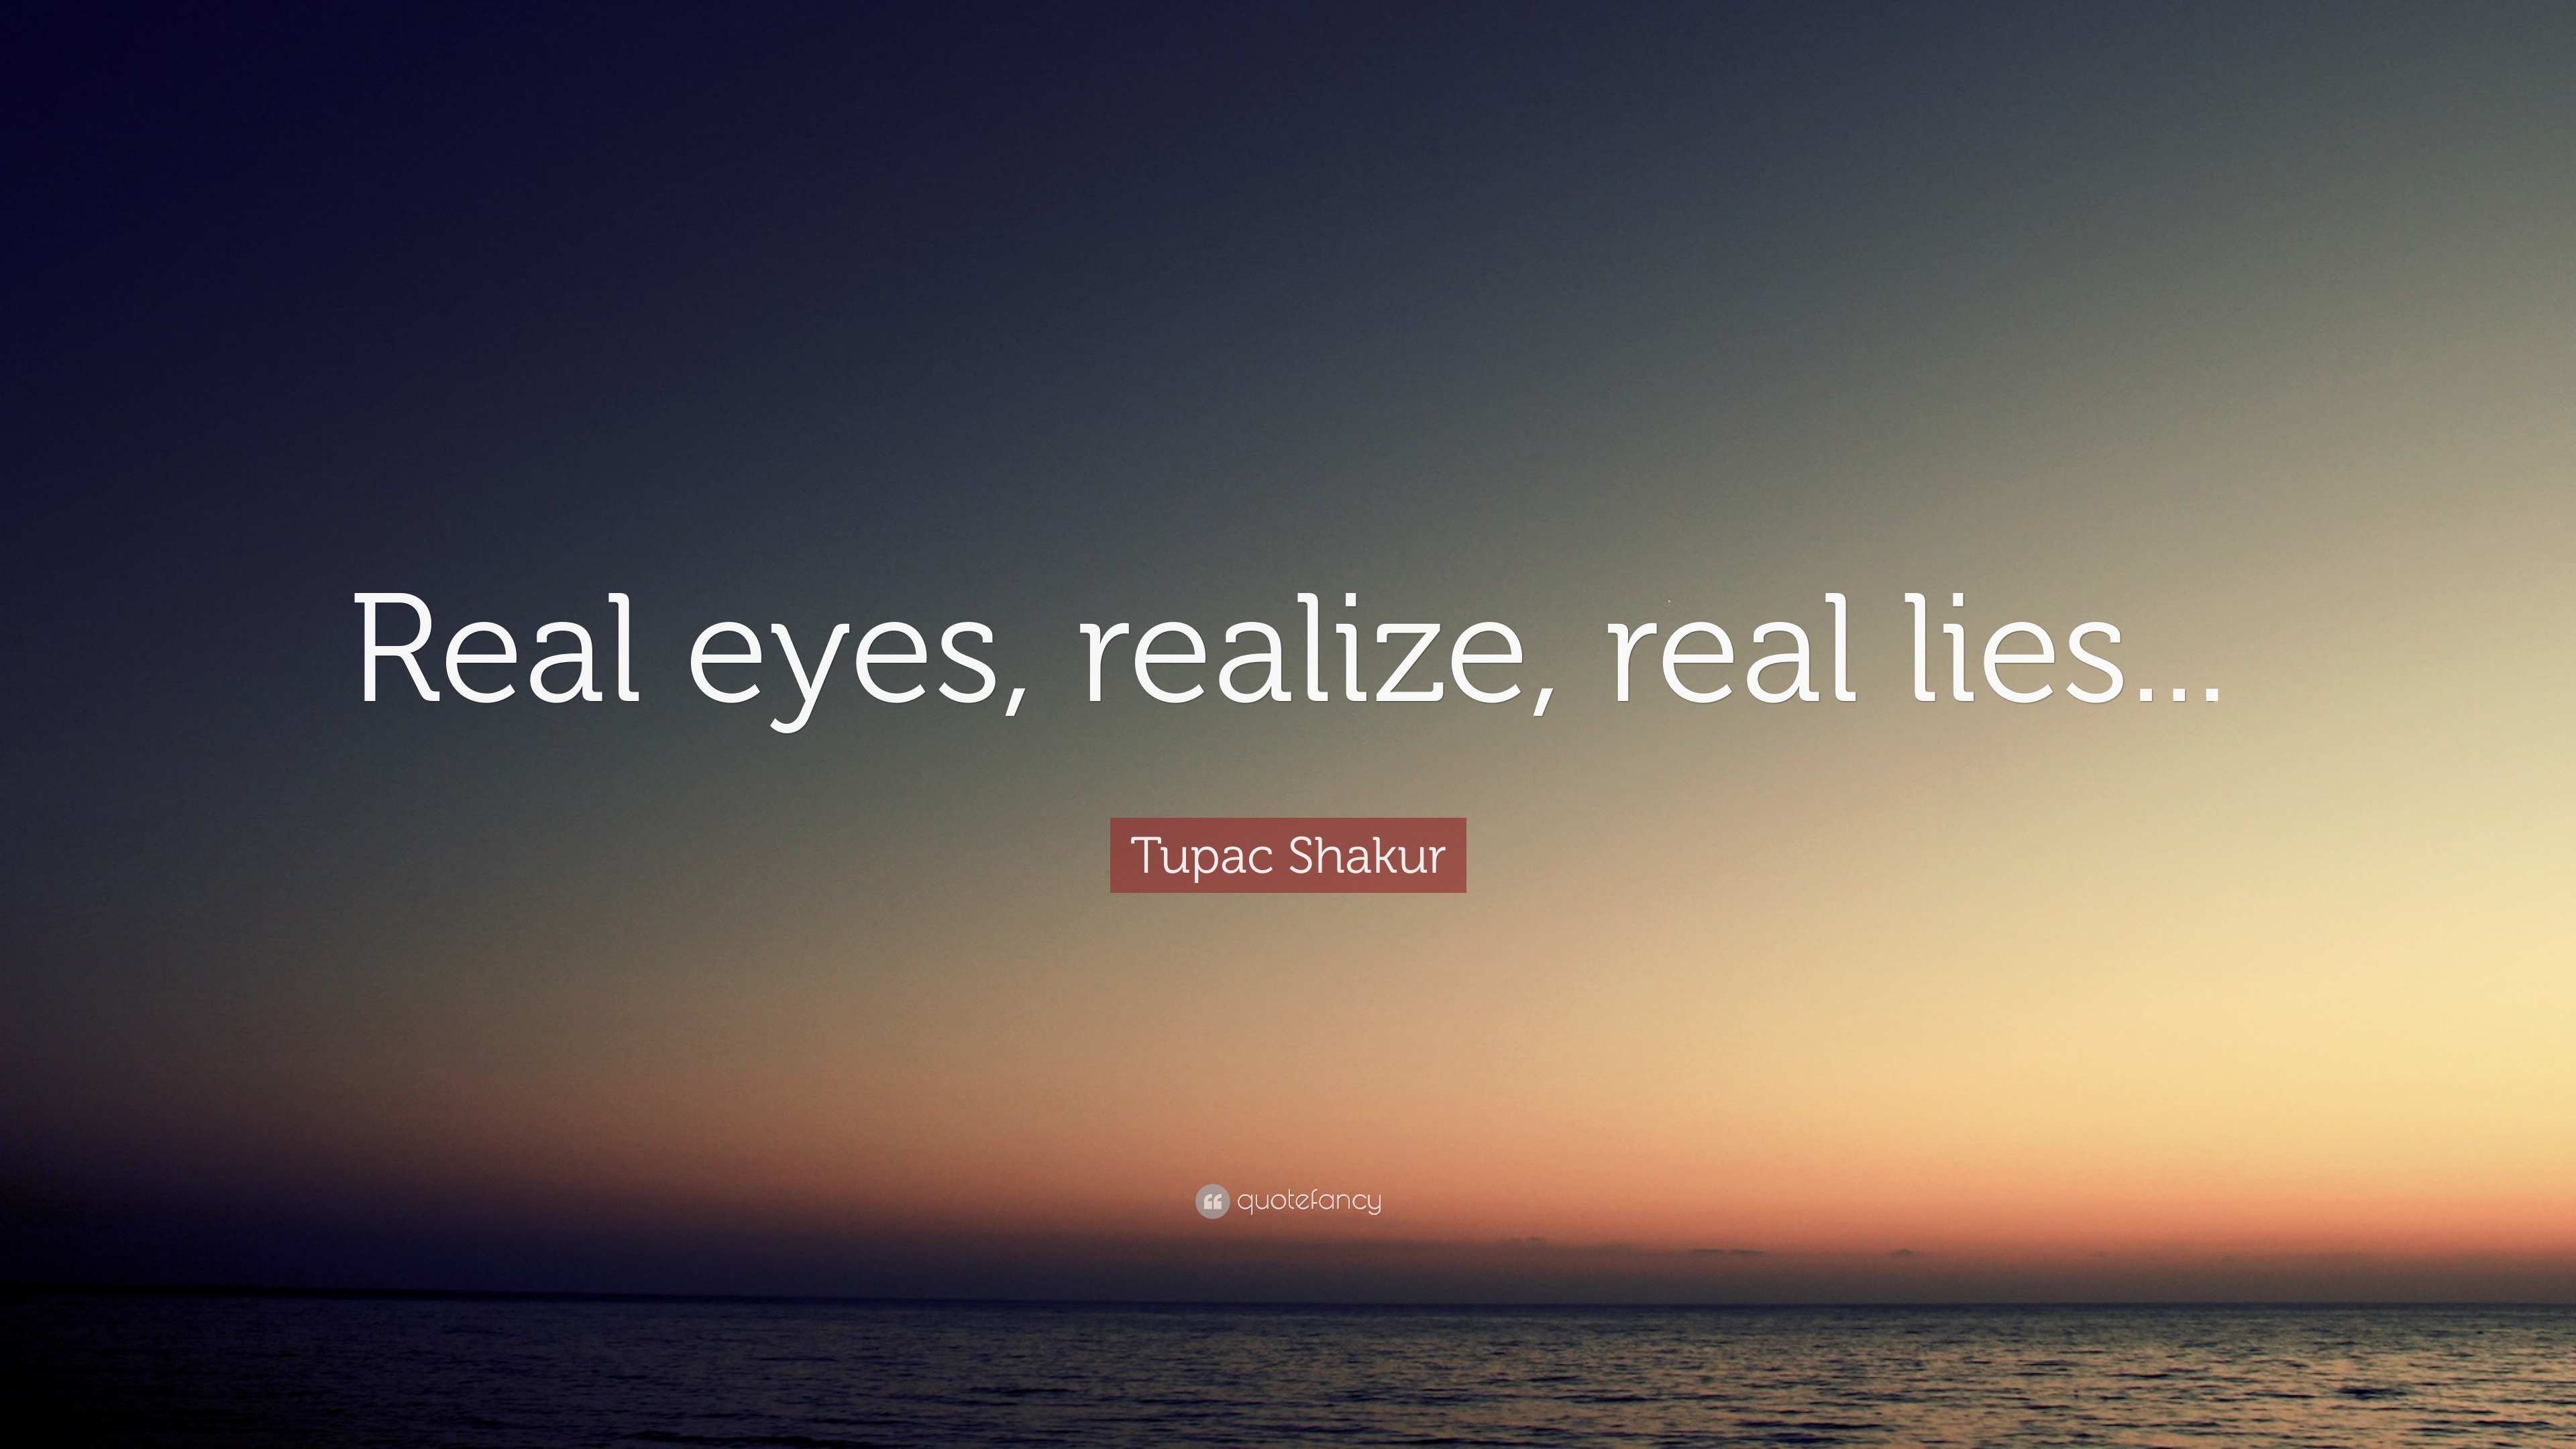 Tupac Shakur Quote: “Real eyes, realize, real lies...”